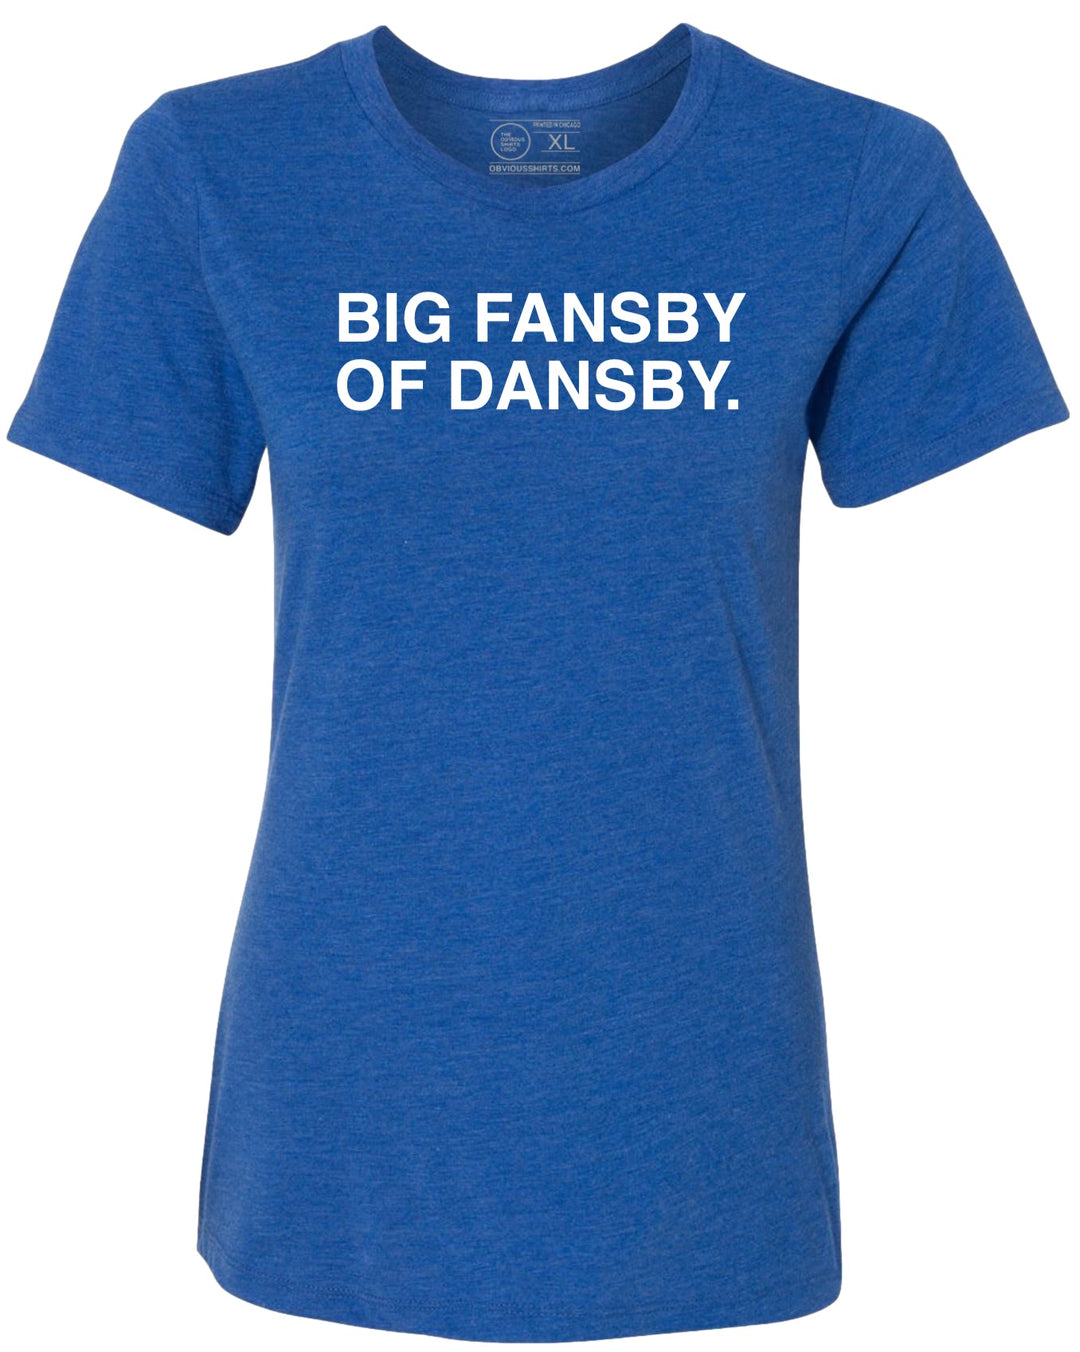 BIG FANSBY OF DANSBY. (WOMEN'S CREW) - OBVIOUS SHIRTS